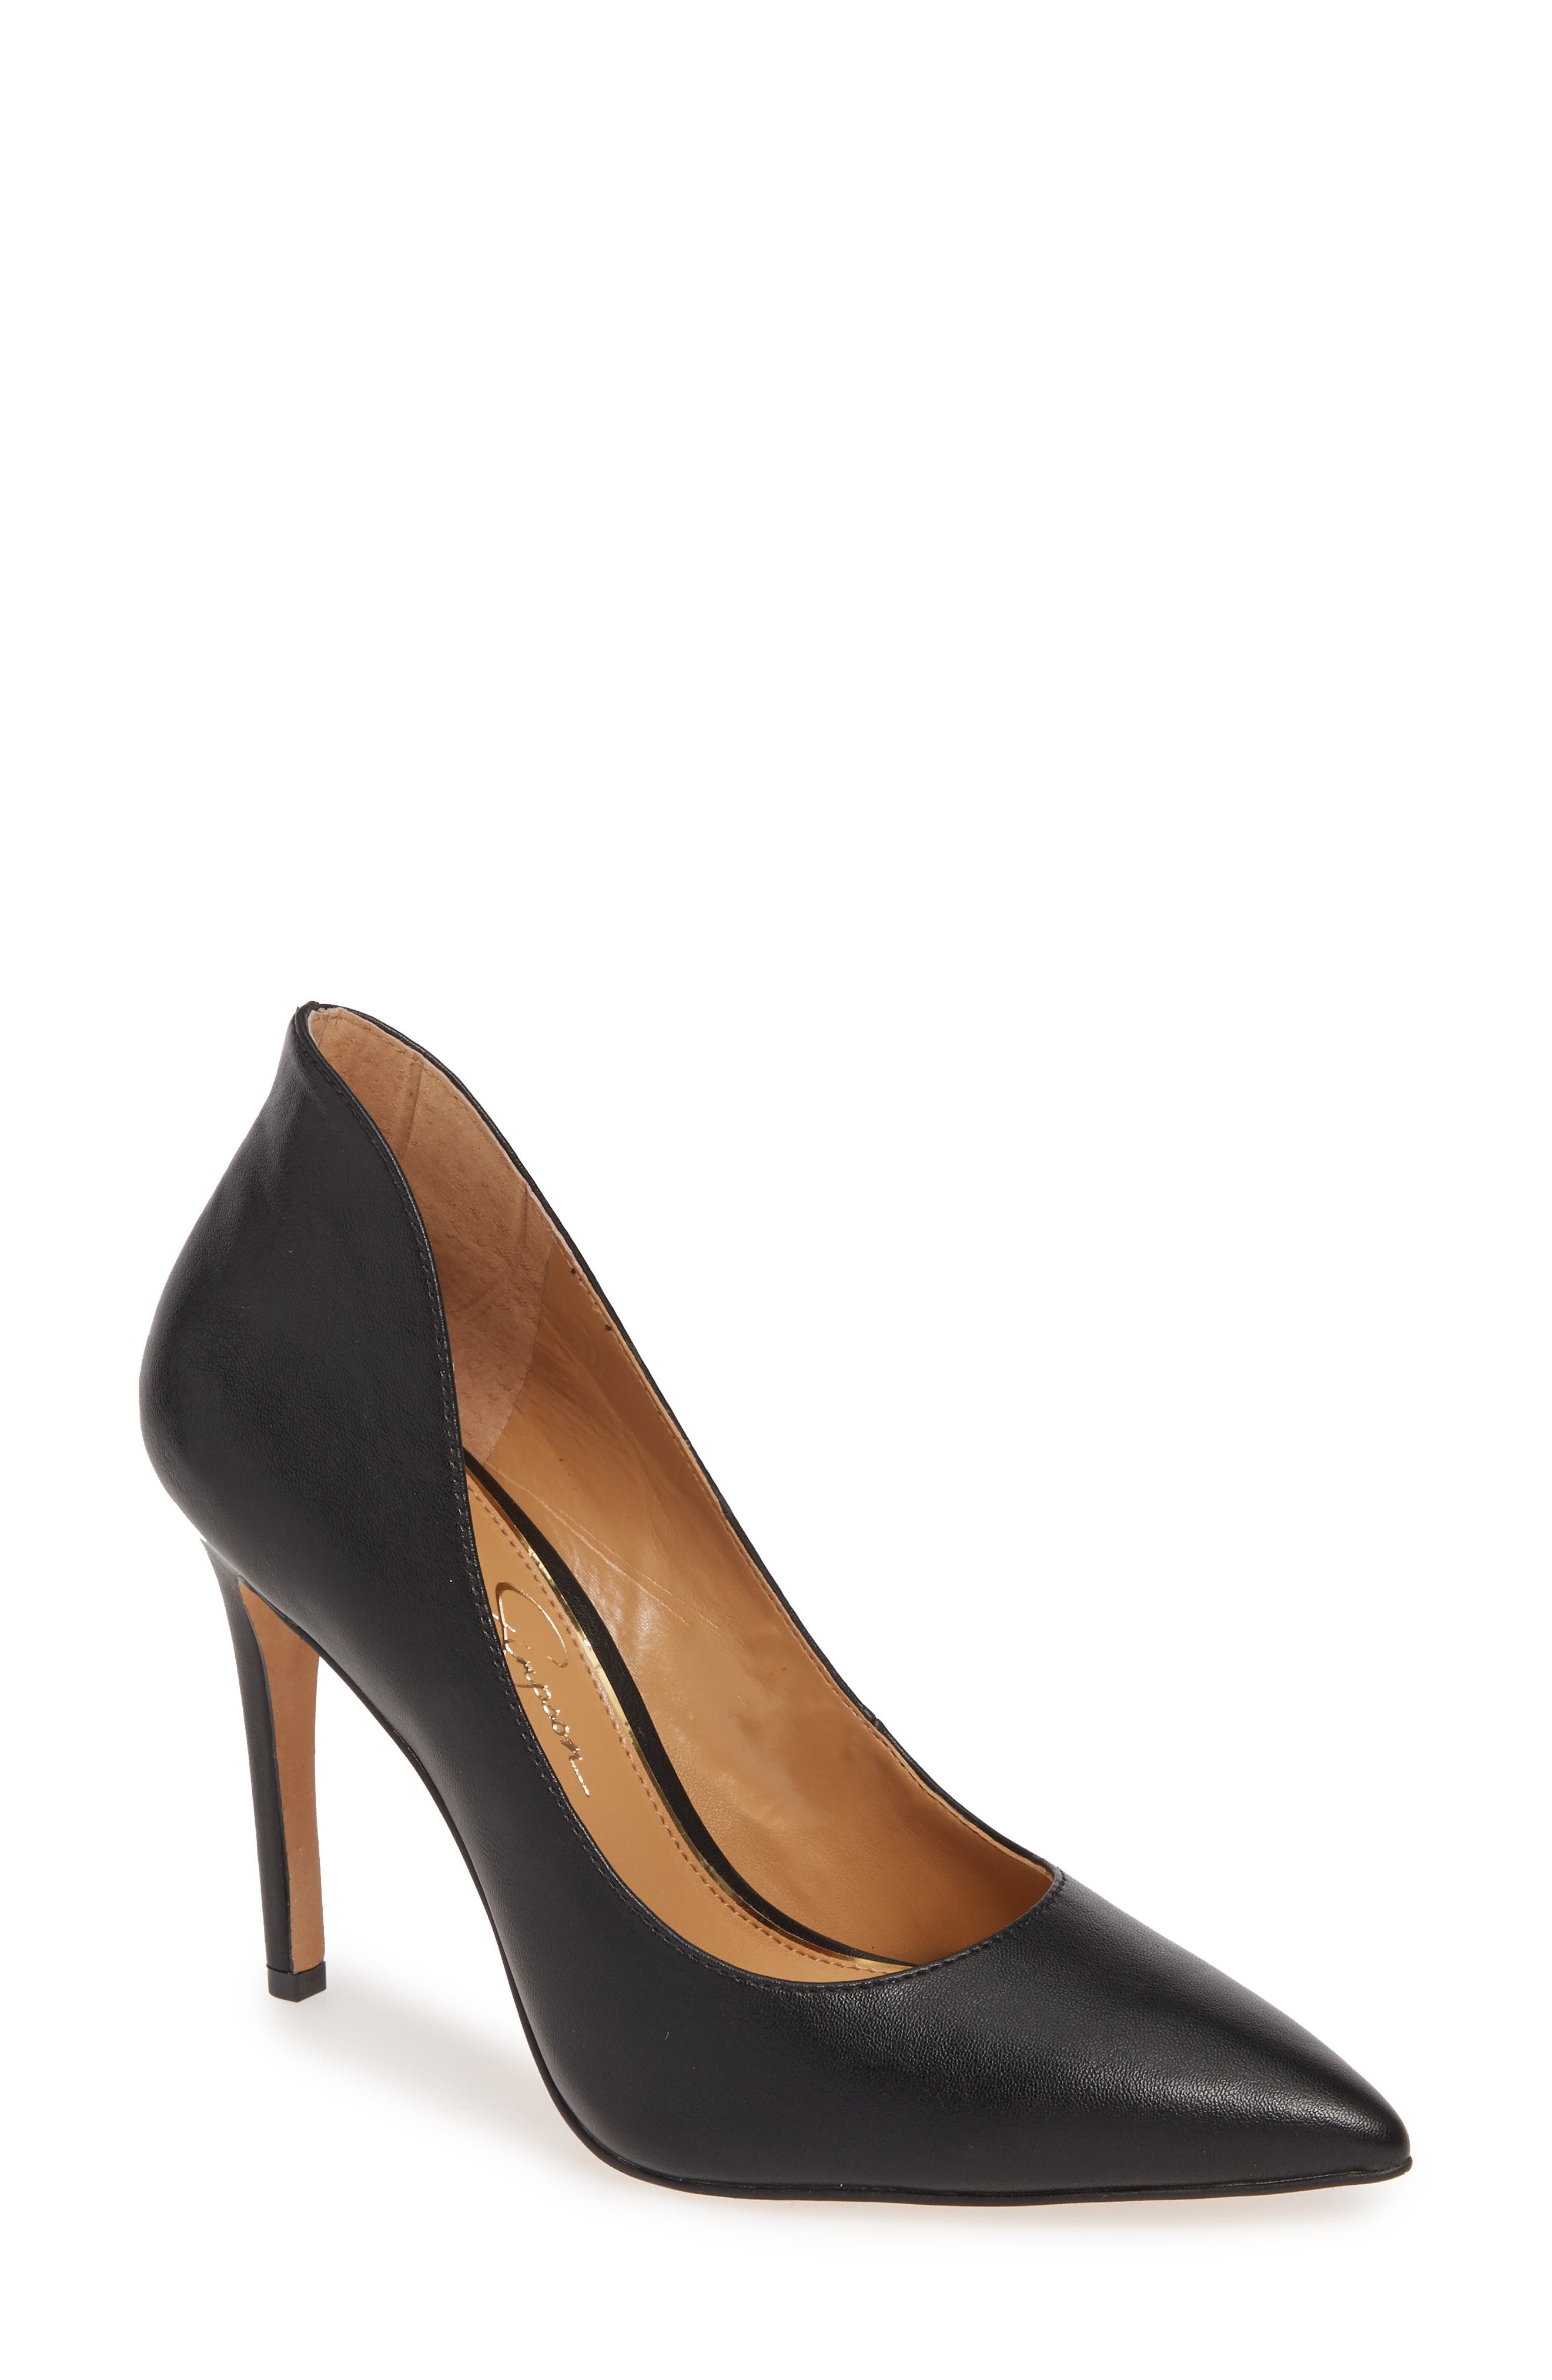 nordstrom jessica simpson shoes